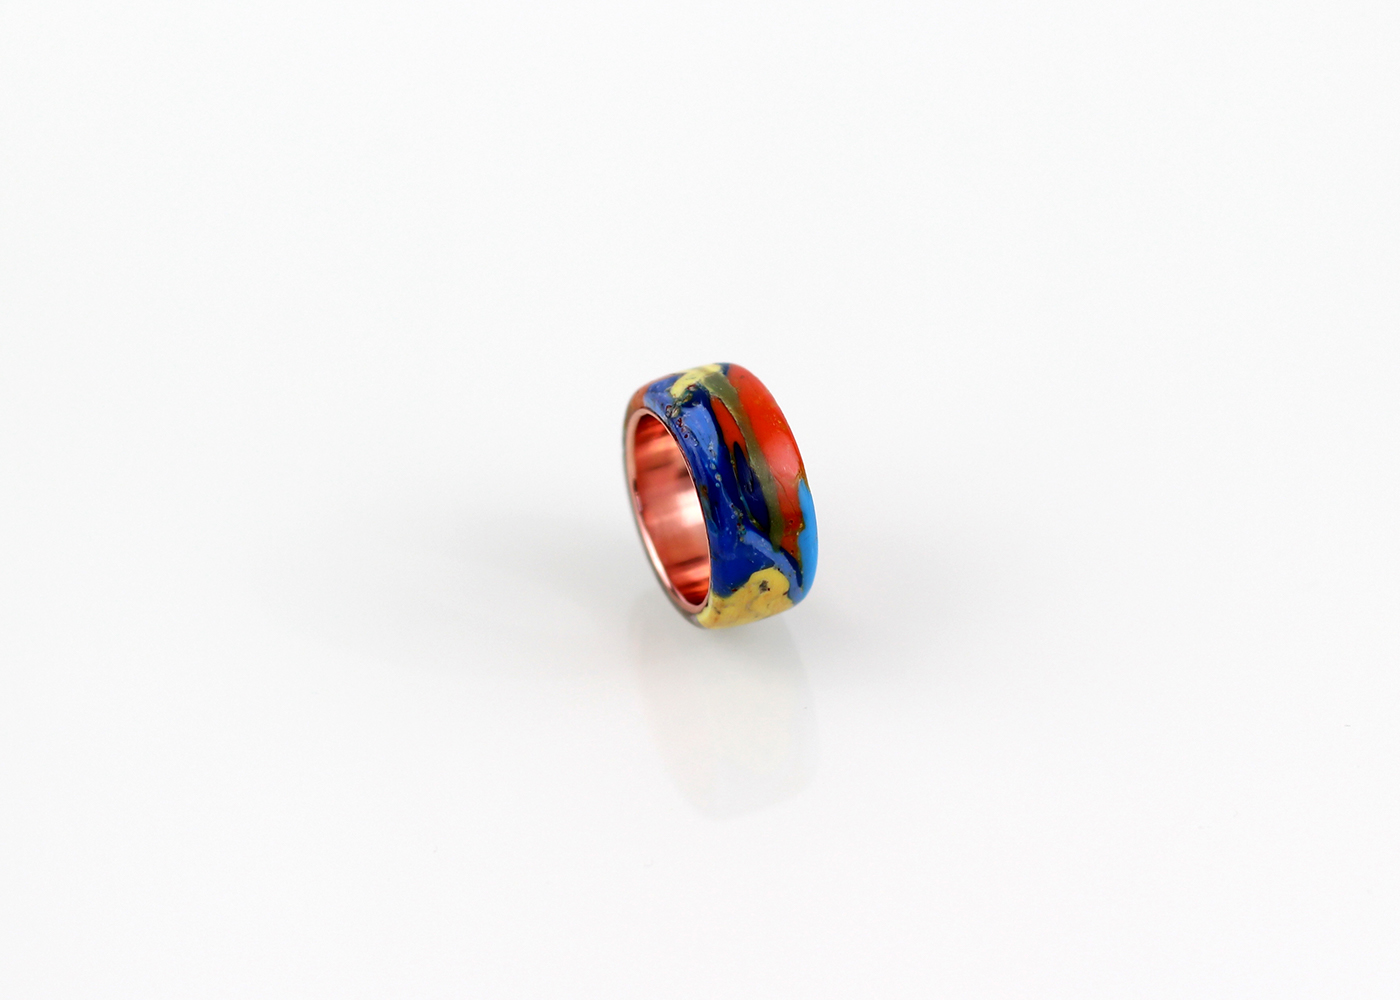 plastic rings handmade recycle colorful steel copper brass wood Accessory jewelry modern Urban abstract melted